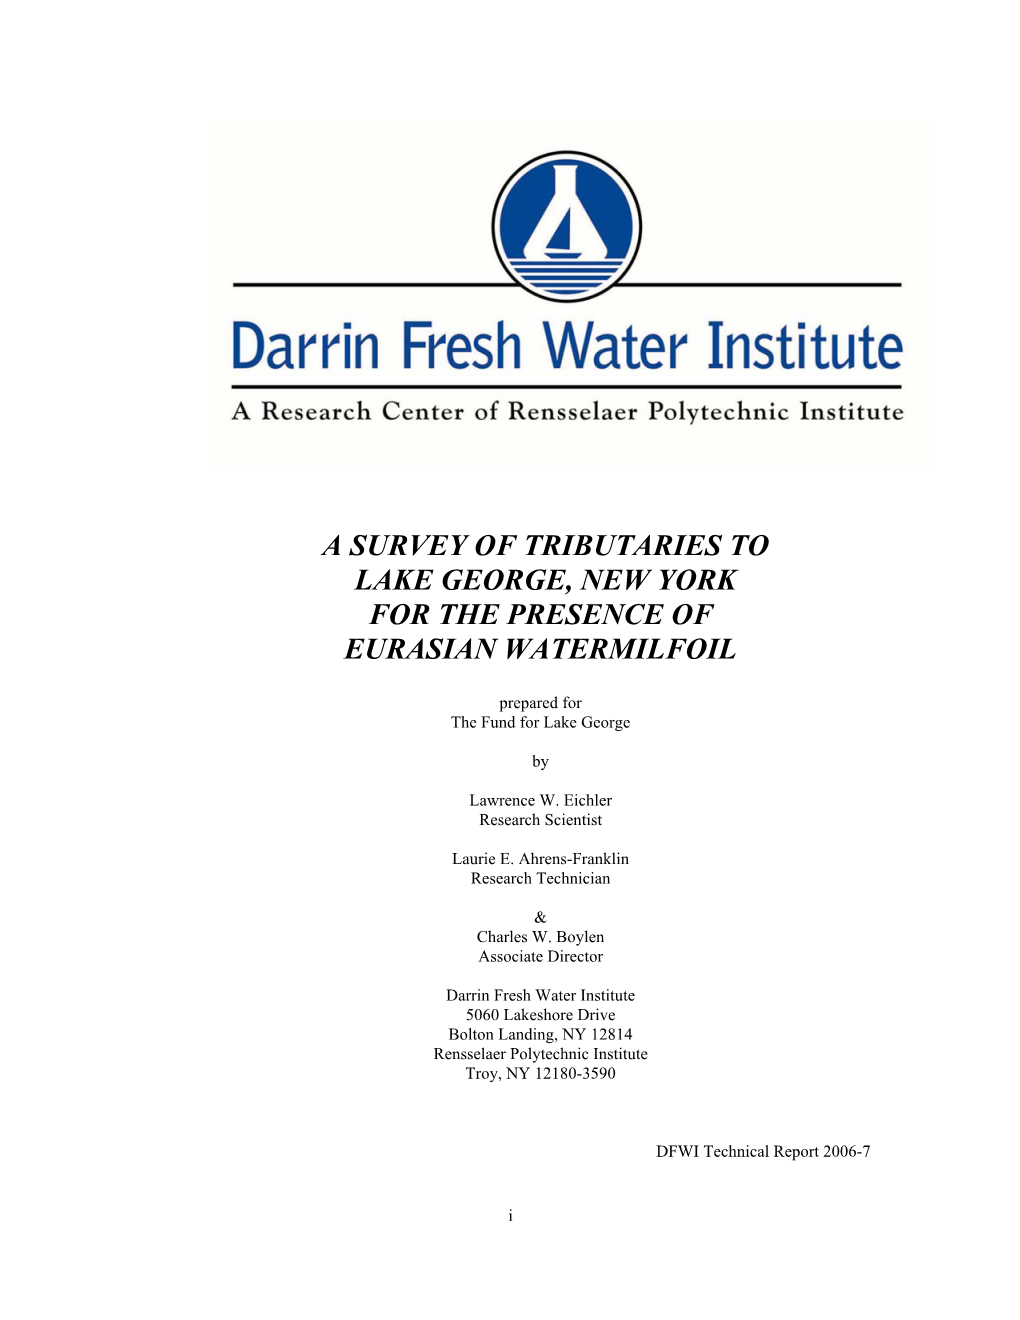 2006 Survey of Tributaries for Eurasian Watermilfoil